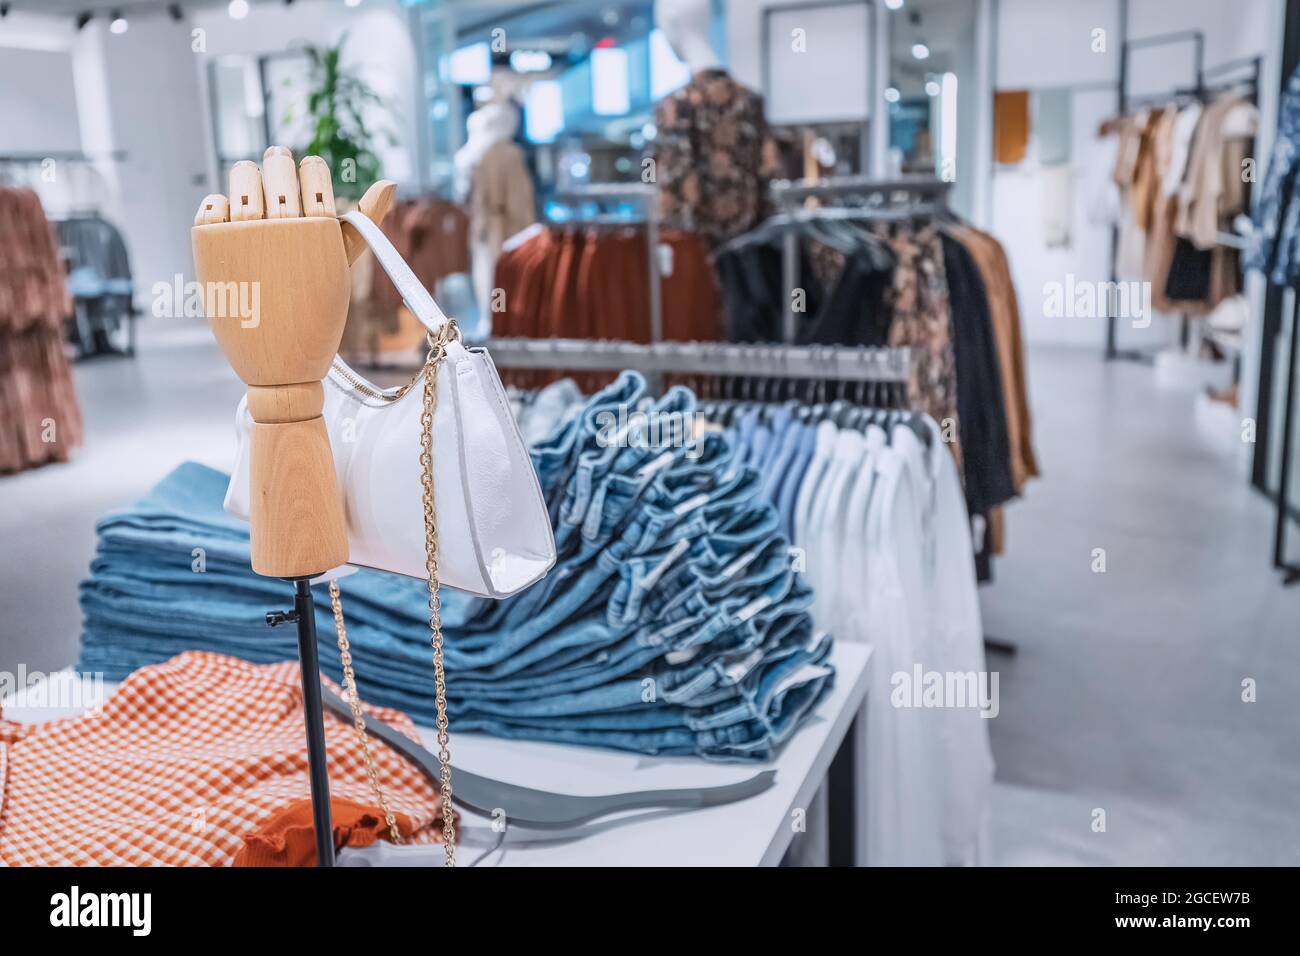 Department of casual fashion clothing the outlet in the shopping center. Stylish leather handbag on a wooden mannequin Stock Photo - Alamy